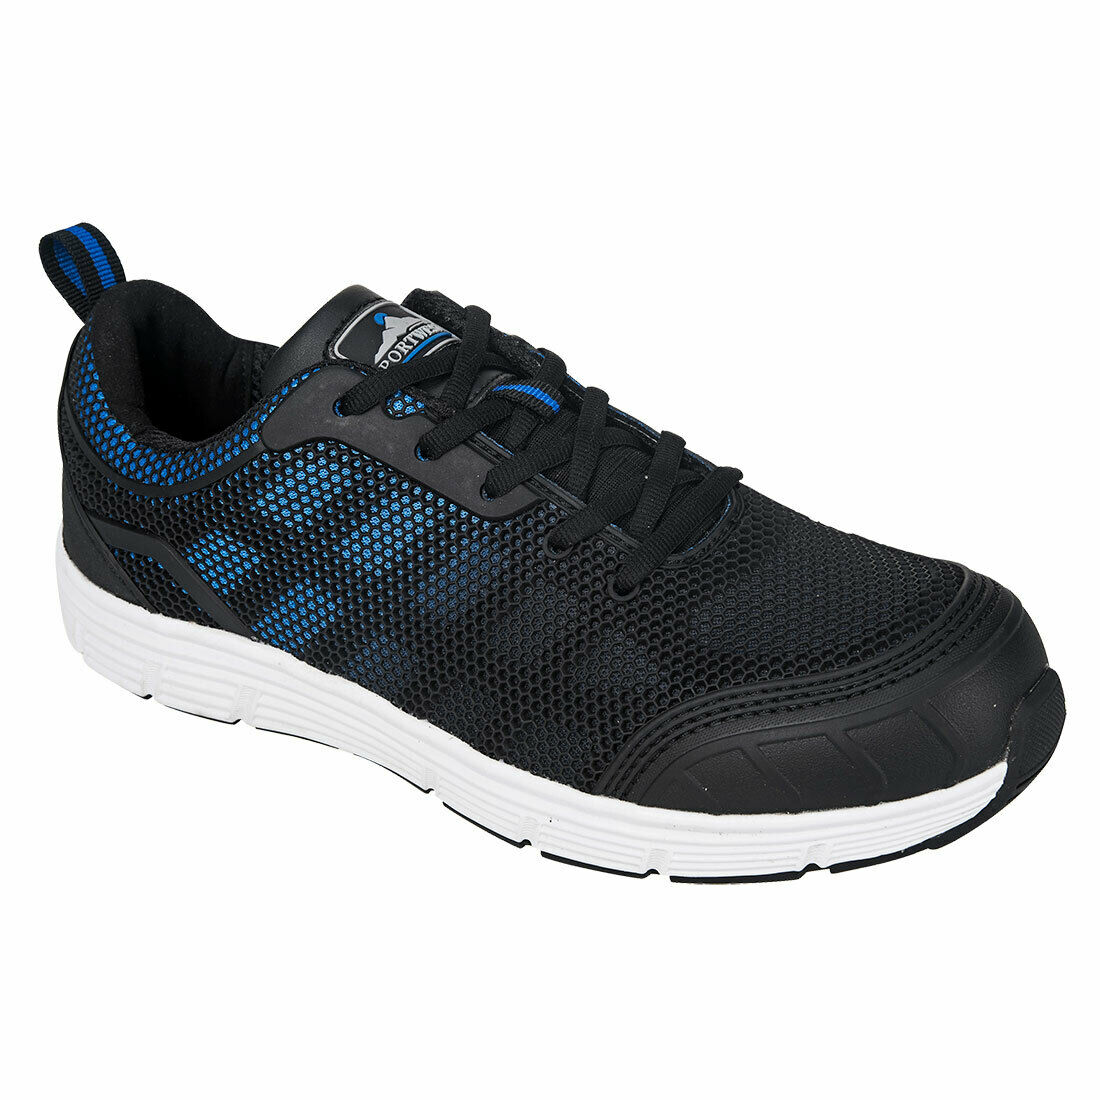 Portwest Steelite Tove Trainer Shoe S1P Lightweight Safety Protection FT15